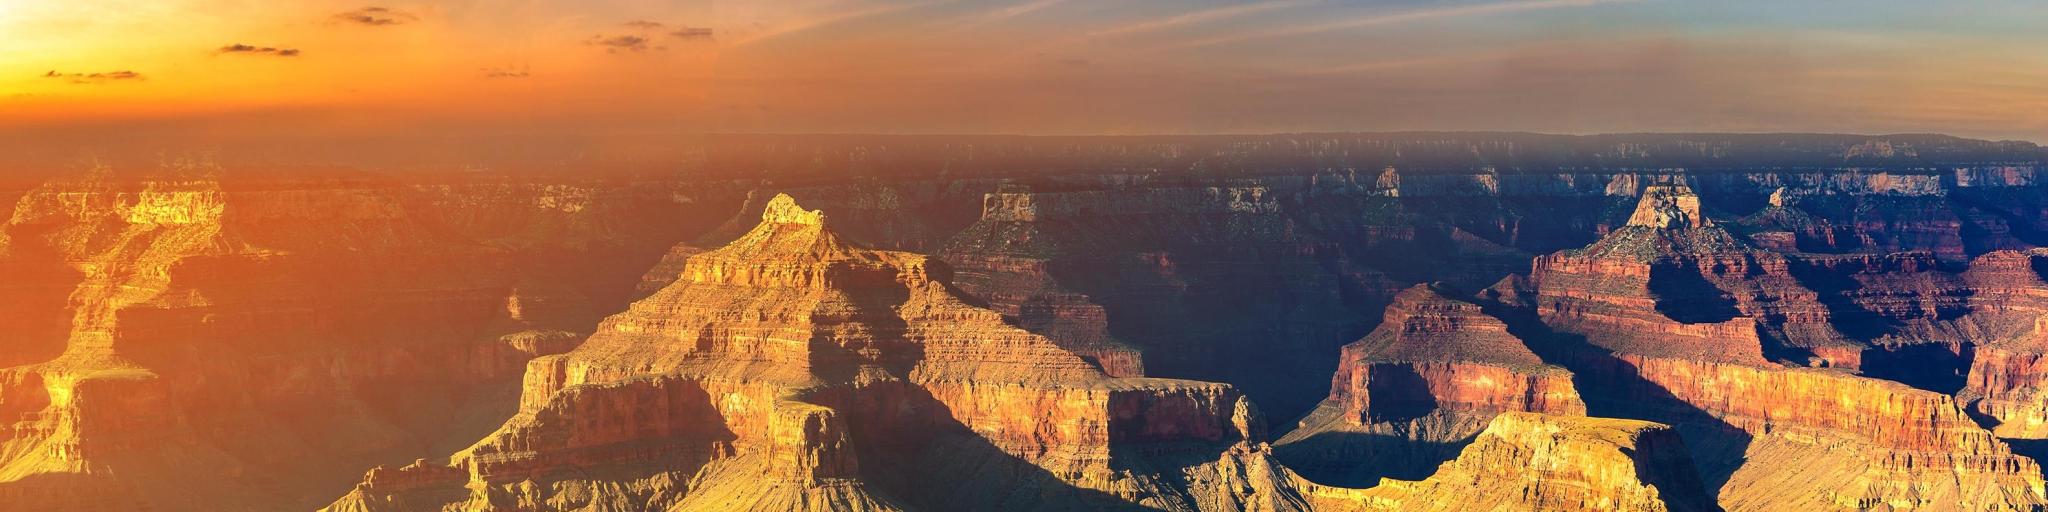 Grand Canyon National Park at Powell Point during a stunning sunset